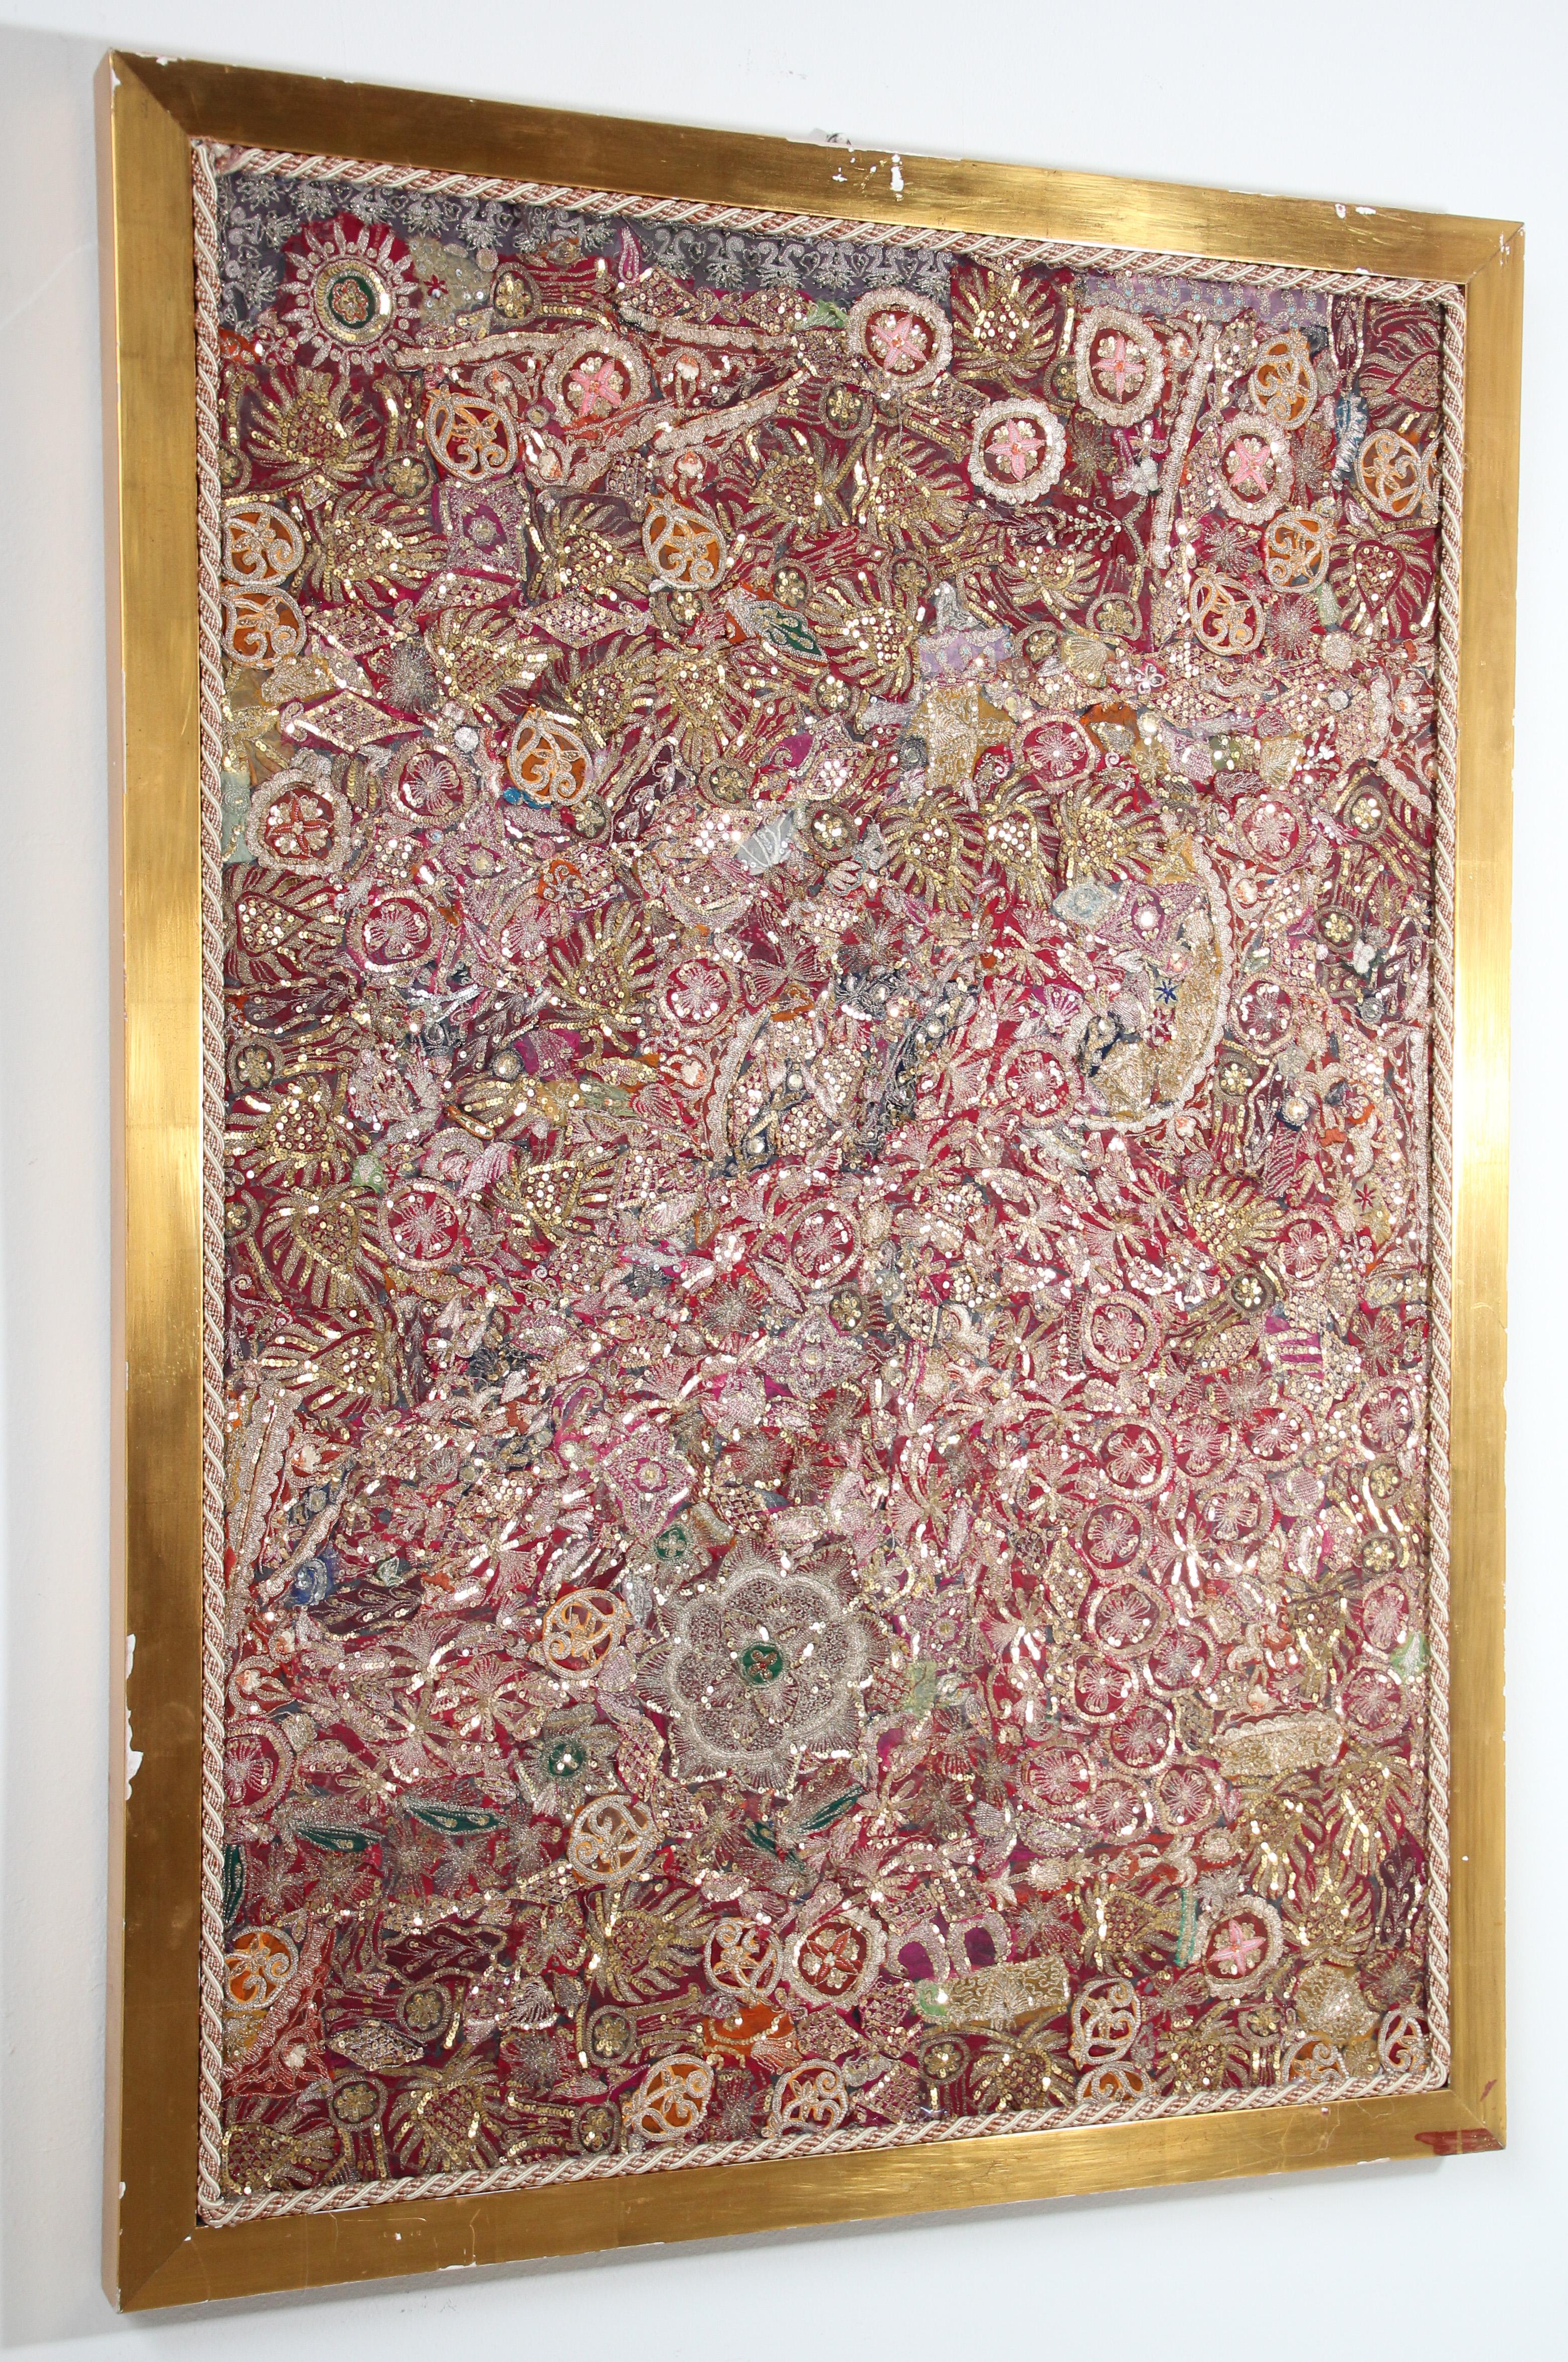 Large framed hand embroidered Mughal silk and metal threaded tapestry textile from North India.
Fanciful Asian Folk Art designs in this distinctive quilt work with a true sense of artistic freedom.
Heavily embroidered with gold and metal threads,